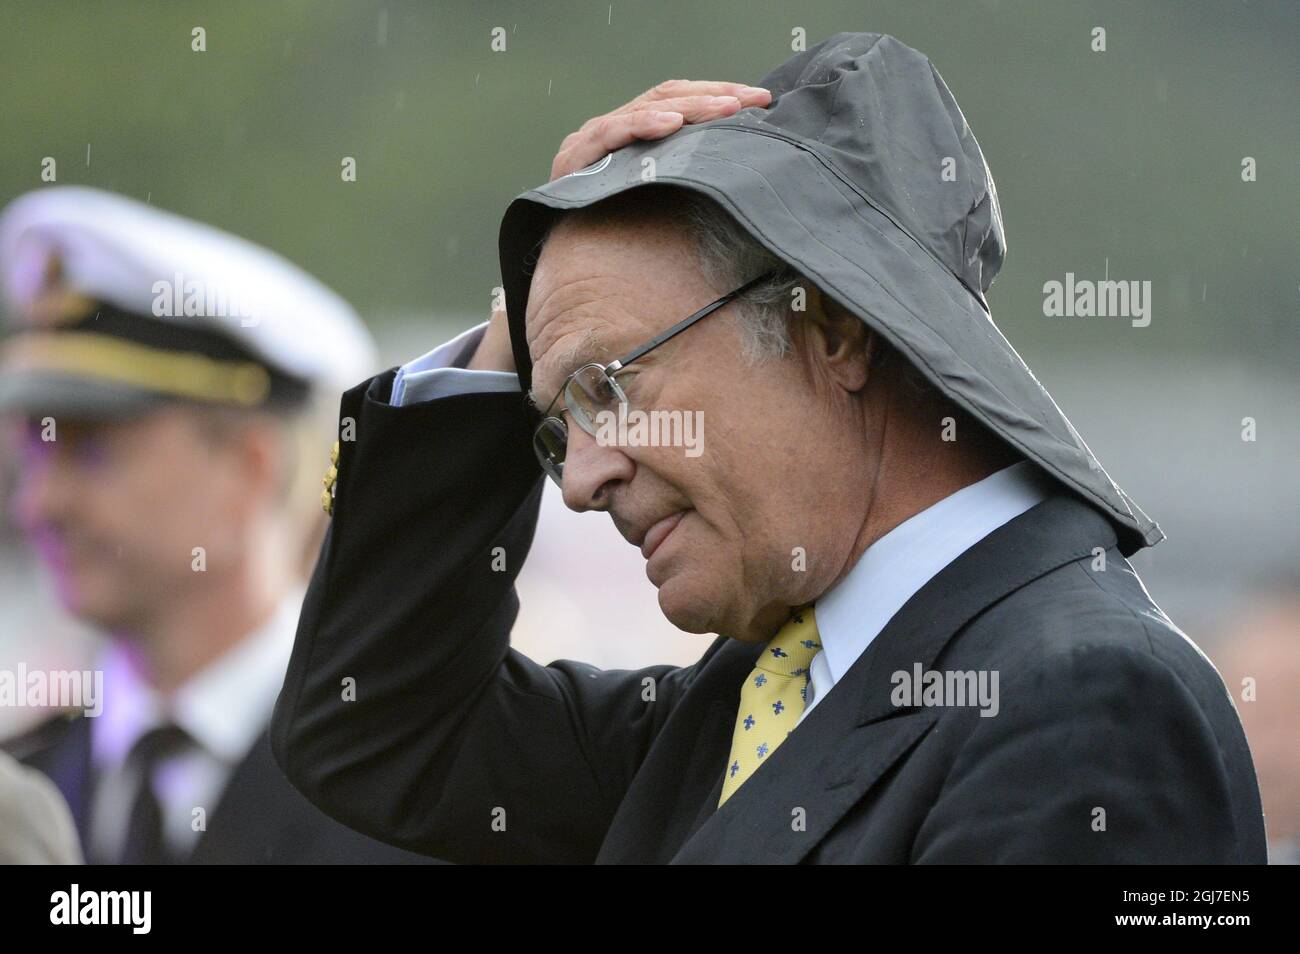 Swedish King Carl Gustaf wears a fur hat during the prize giving ceremony  of the season's last women's downhill race at the Alpine Skiing World Cup  Finals in Are March 11, 2009.